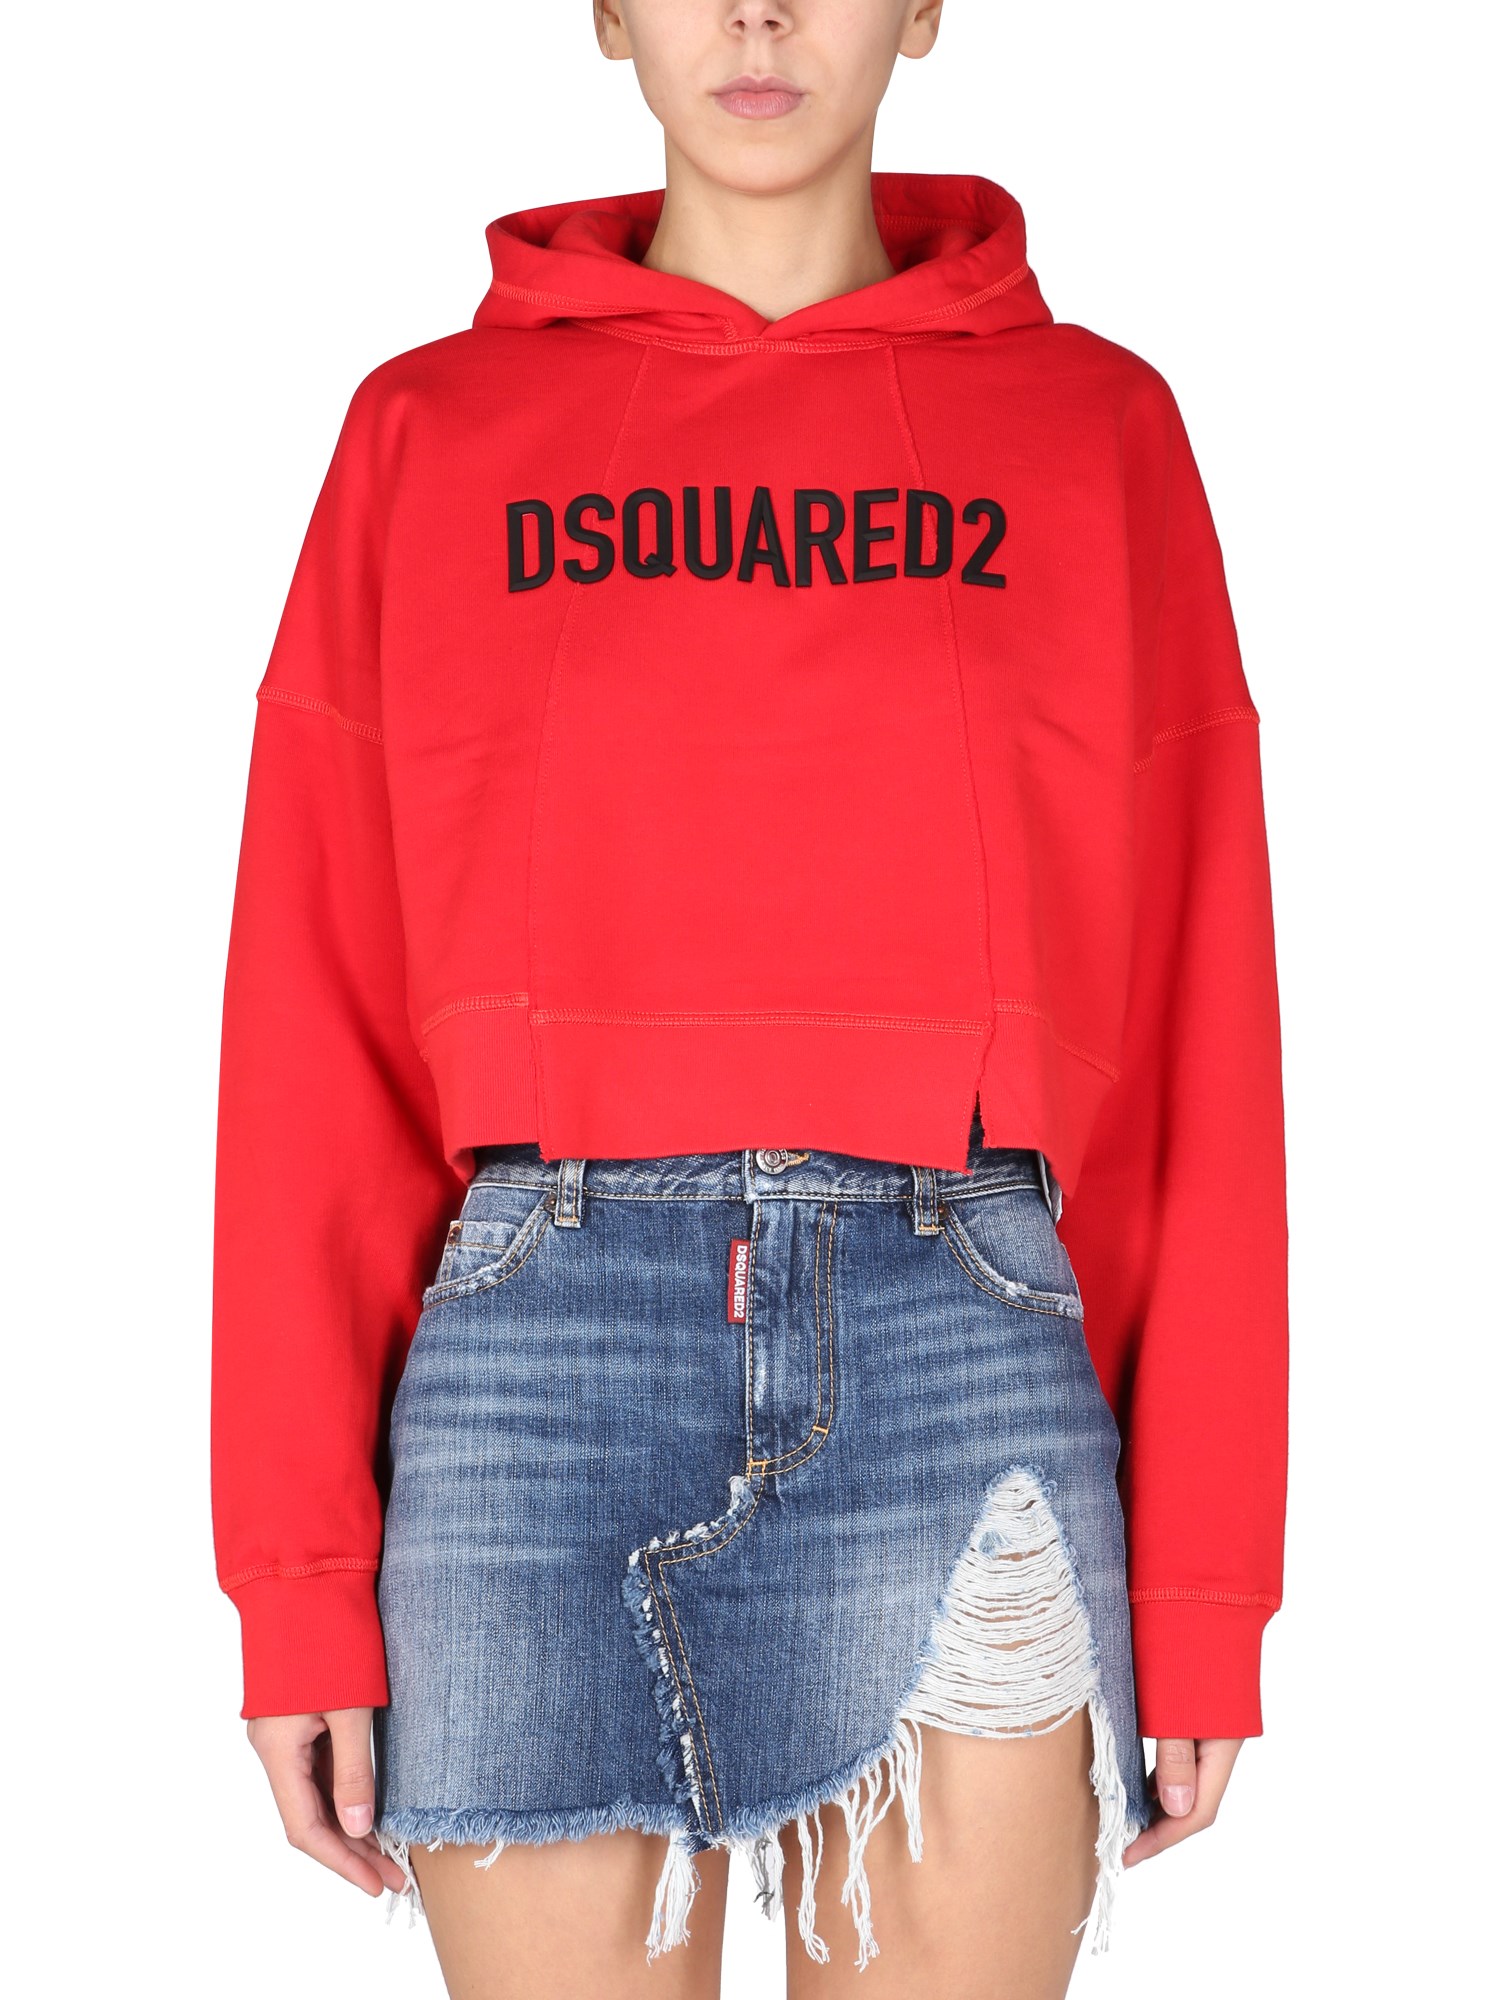 dsquared sweatshirt with rubber logo